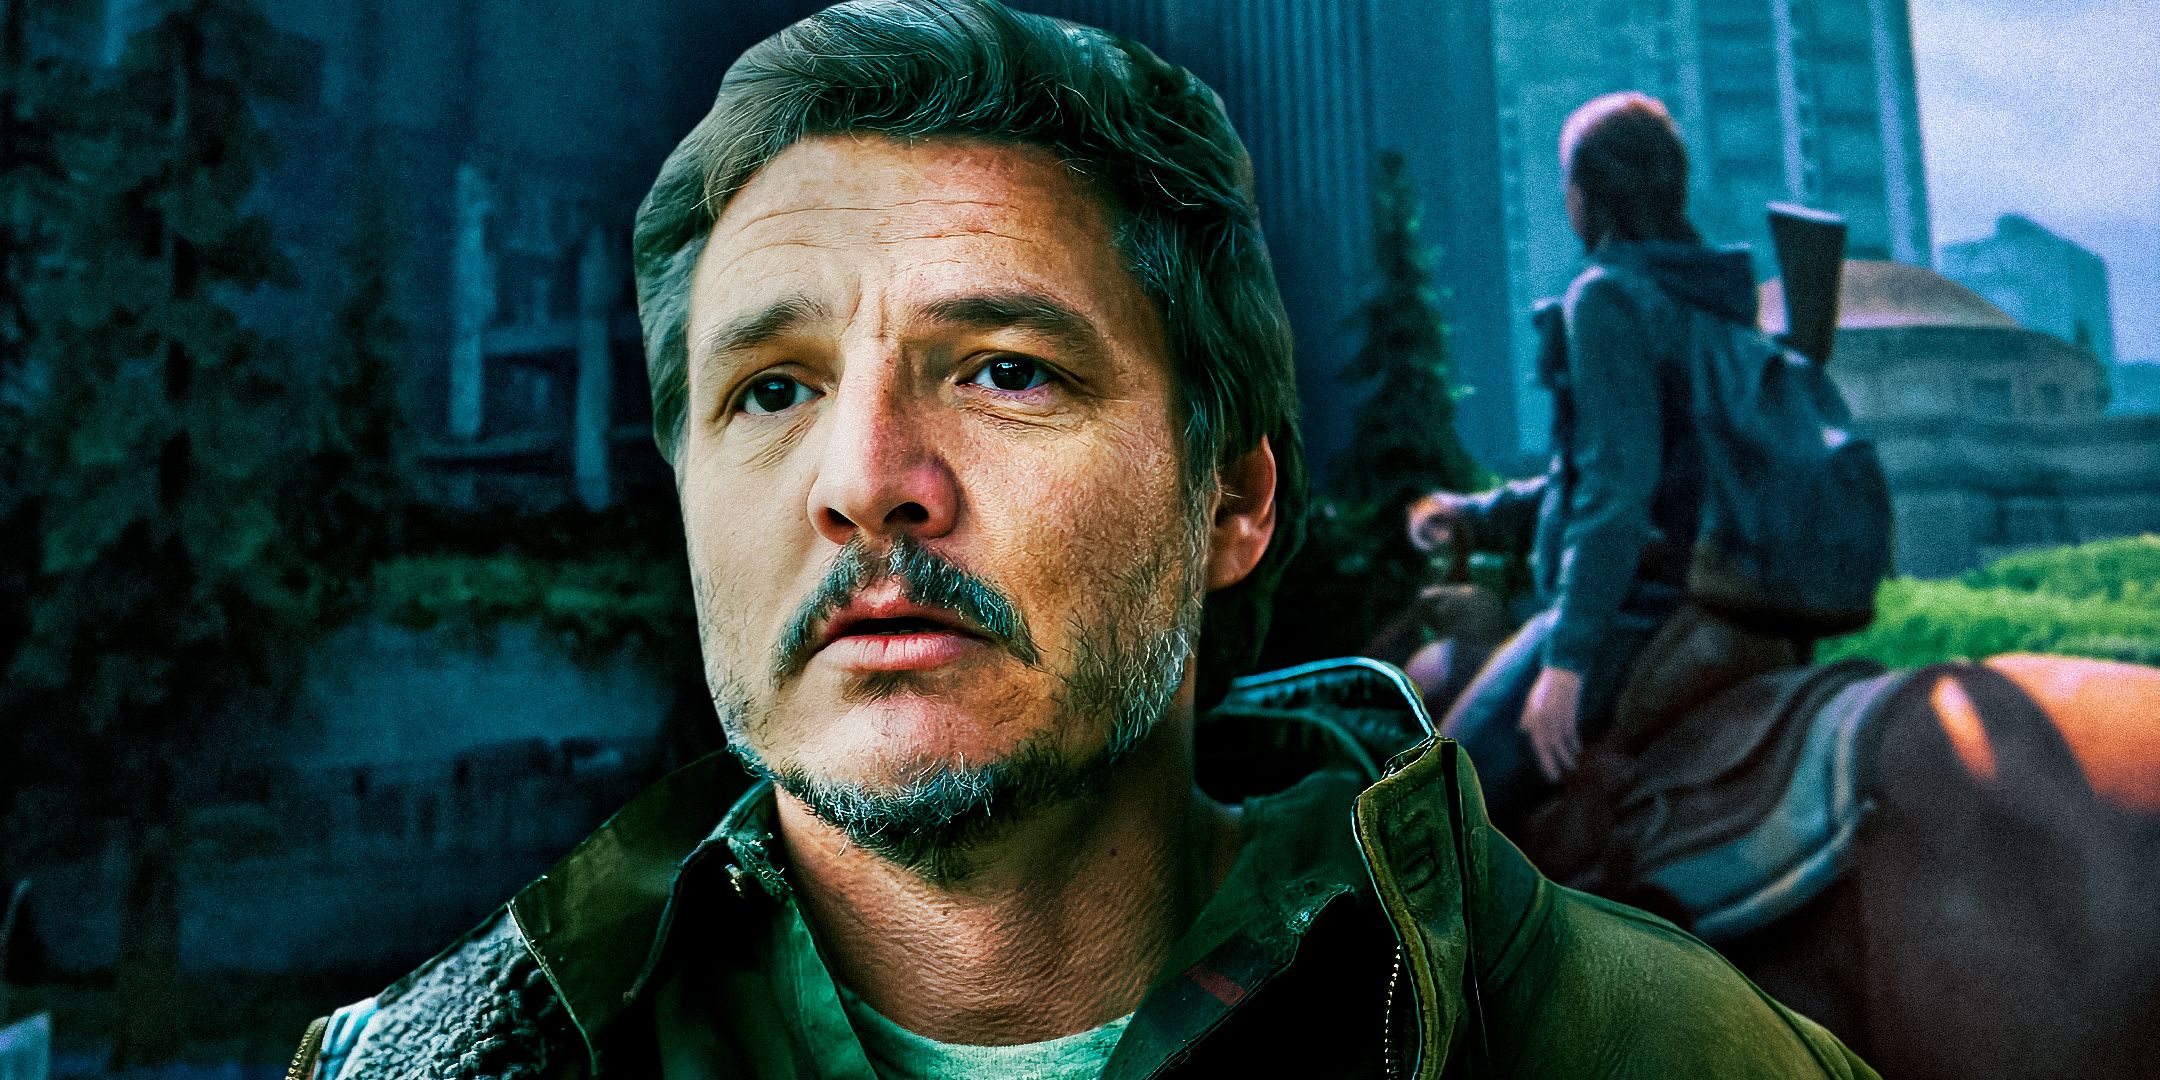 Pedro Pascal as Joel Miller from The Last of Us show and Ellie riding a horse in The Last of Us game in the background